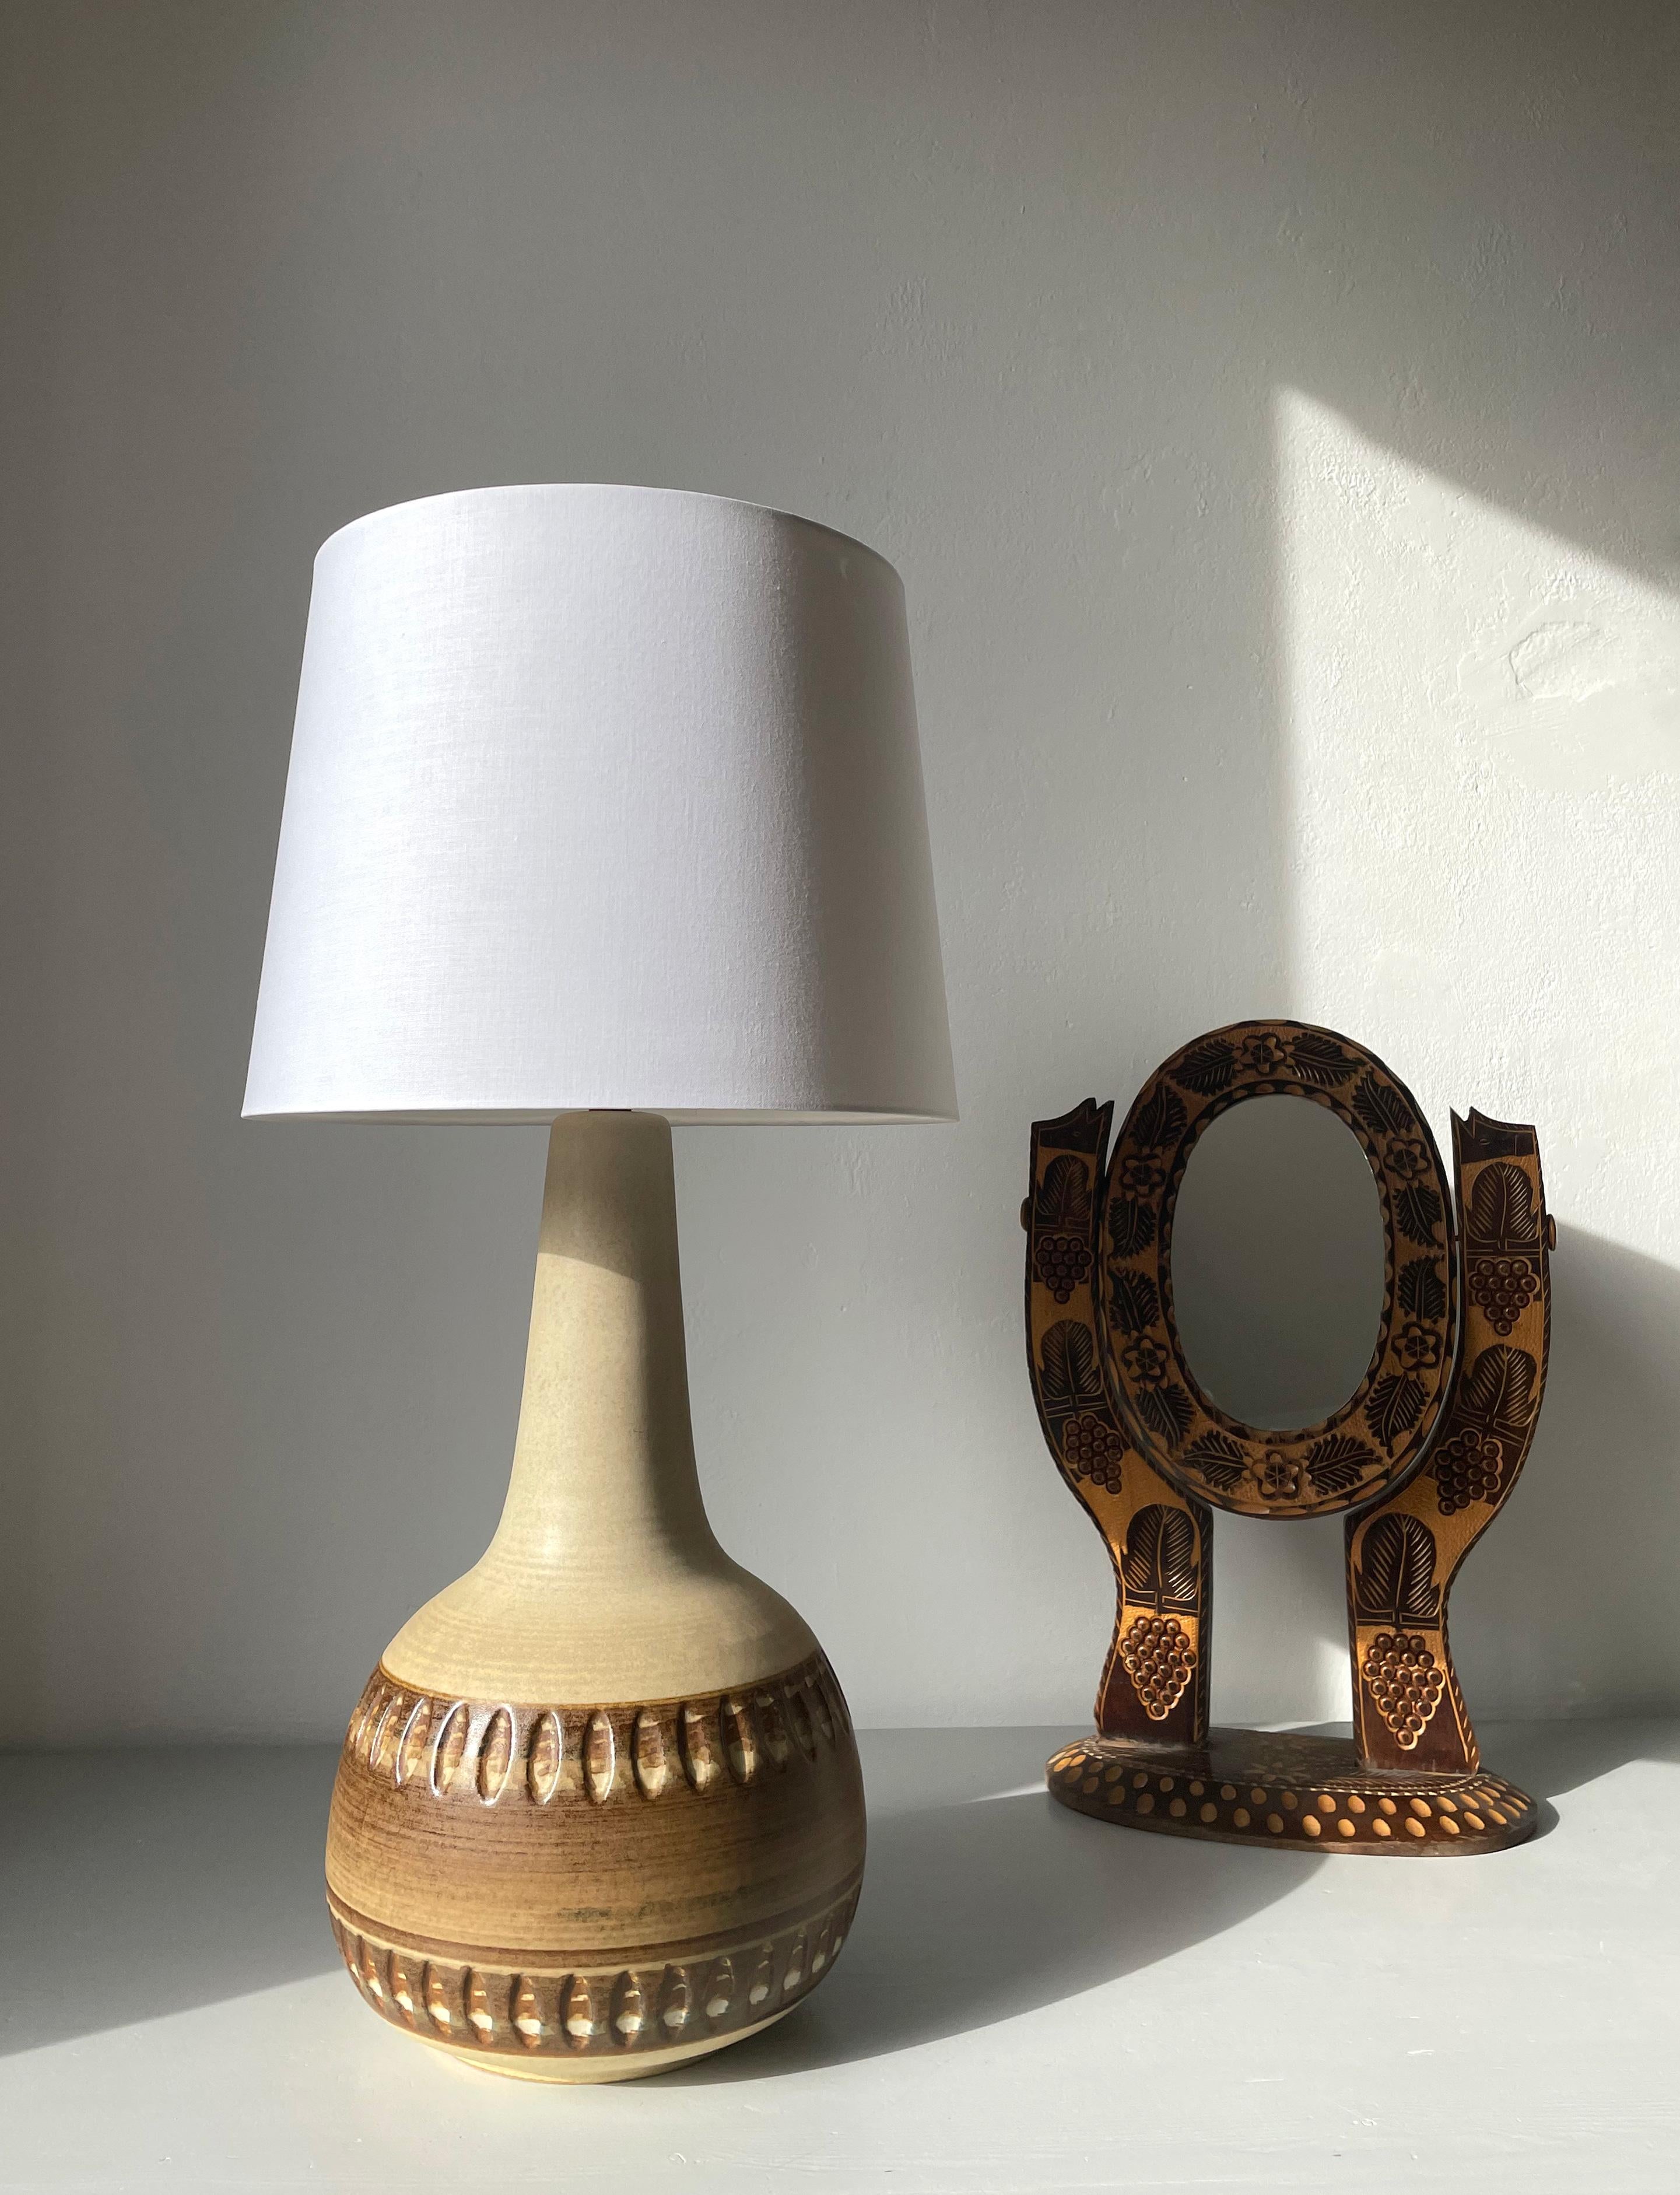 Large sand, beige, brown glazed stoneware lamp manufactured on the Danish island of Bornholm by Søholm Stentøj in the 1960s. Slender light sand colored neck and a brown belly with graphic relief pattern. Fully glazed. Stamped under base. Shade not